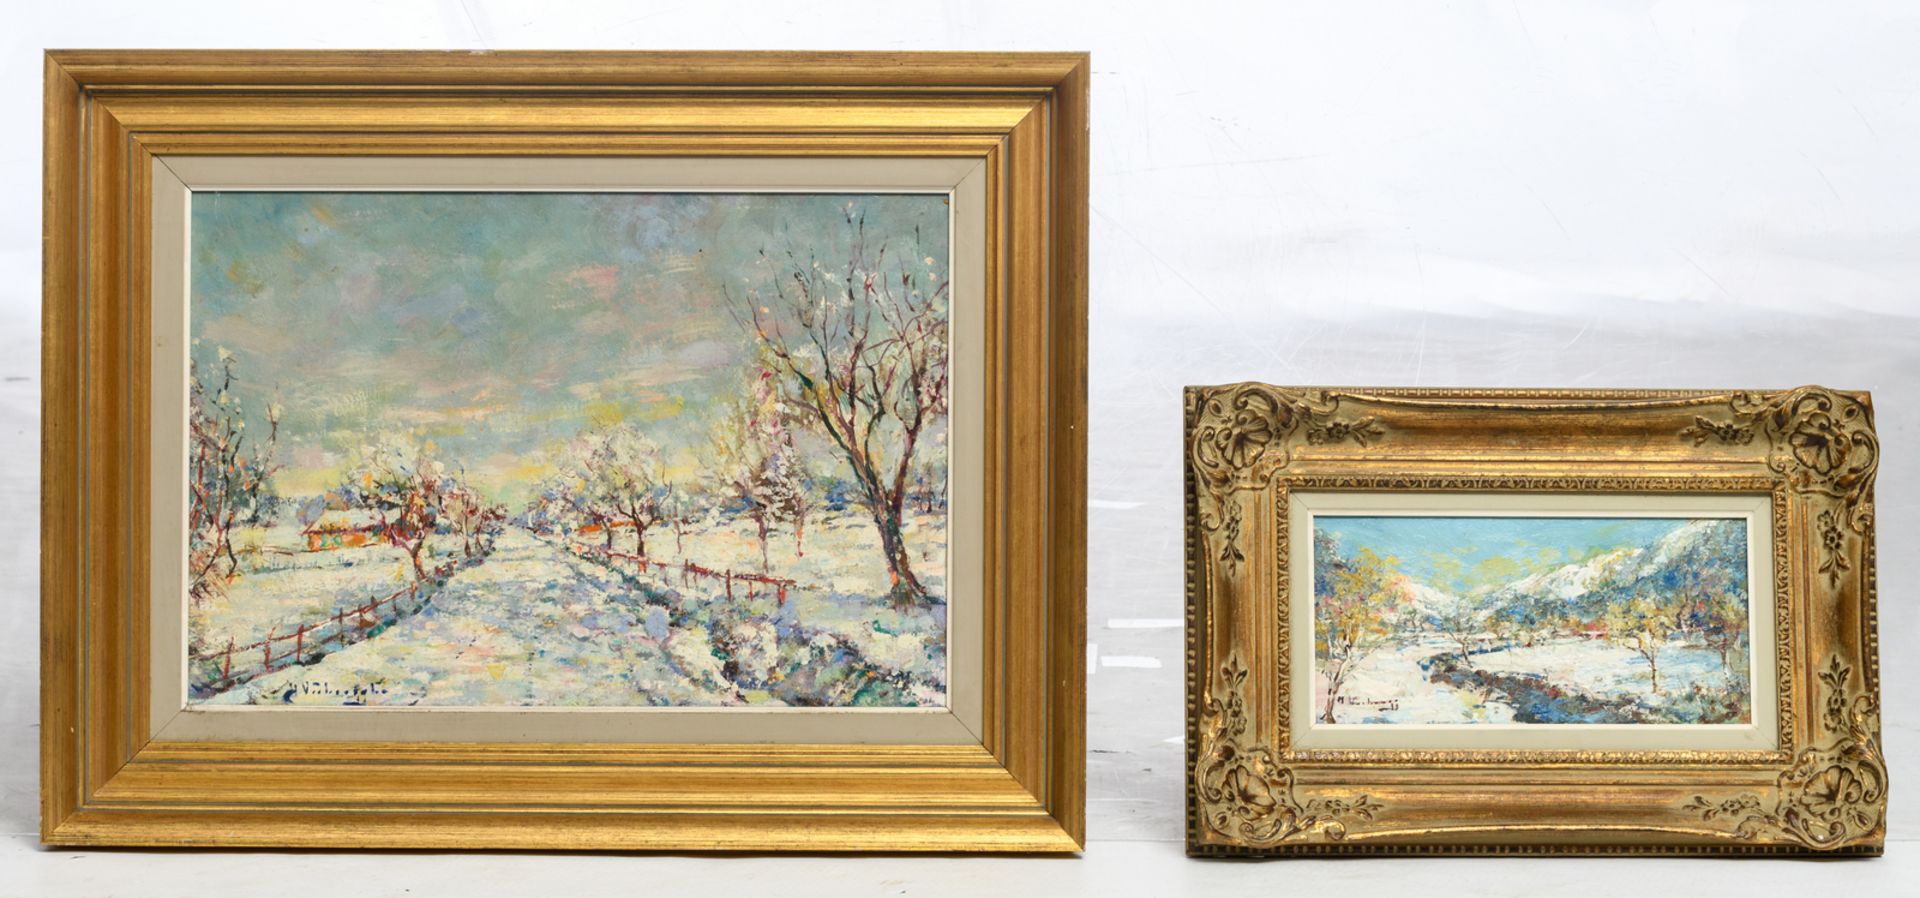 Verbrugghe C., 'Paysage D'Hyver' and a winter landscape, oil on board, 15 x 31 and 37,5 x 54,5 cm - Image 2 of 6